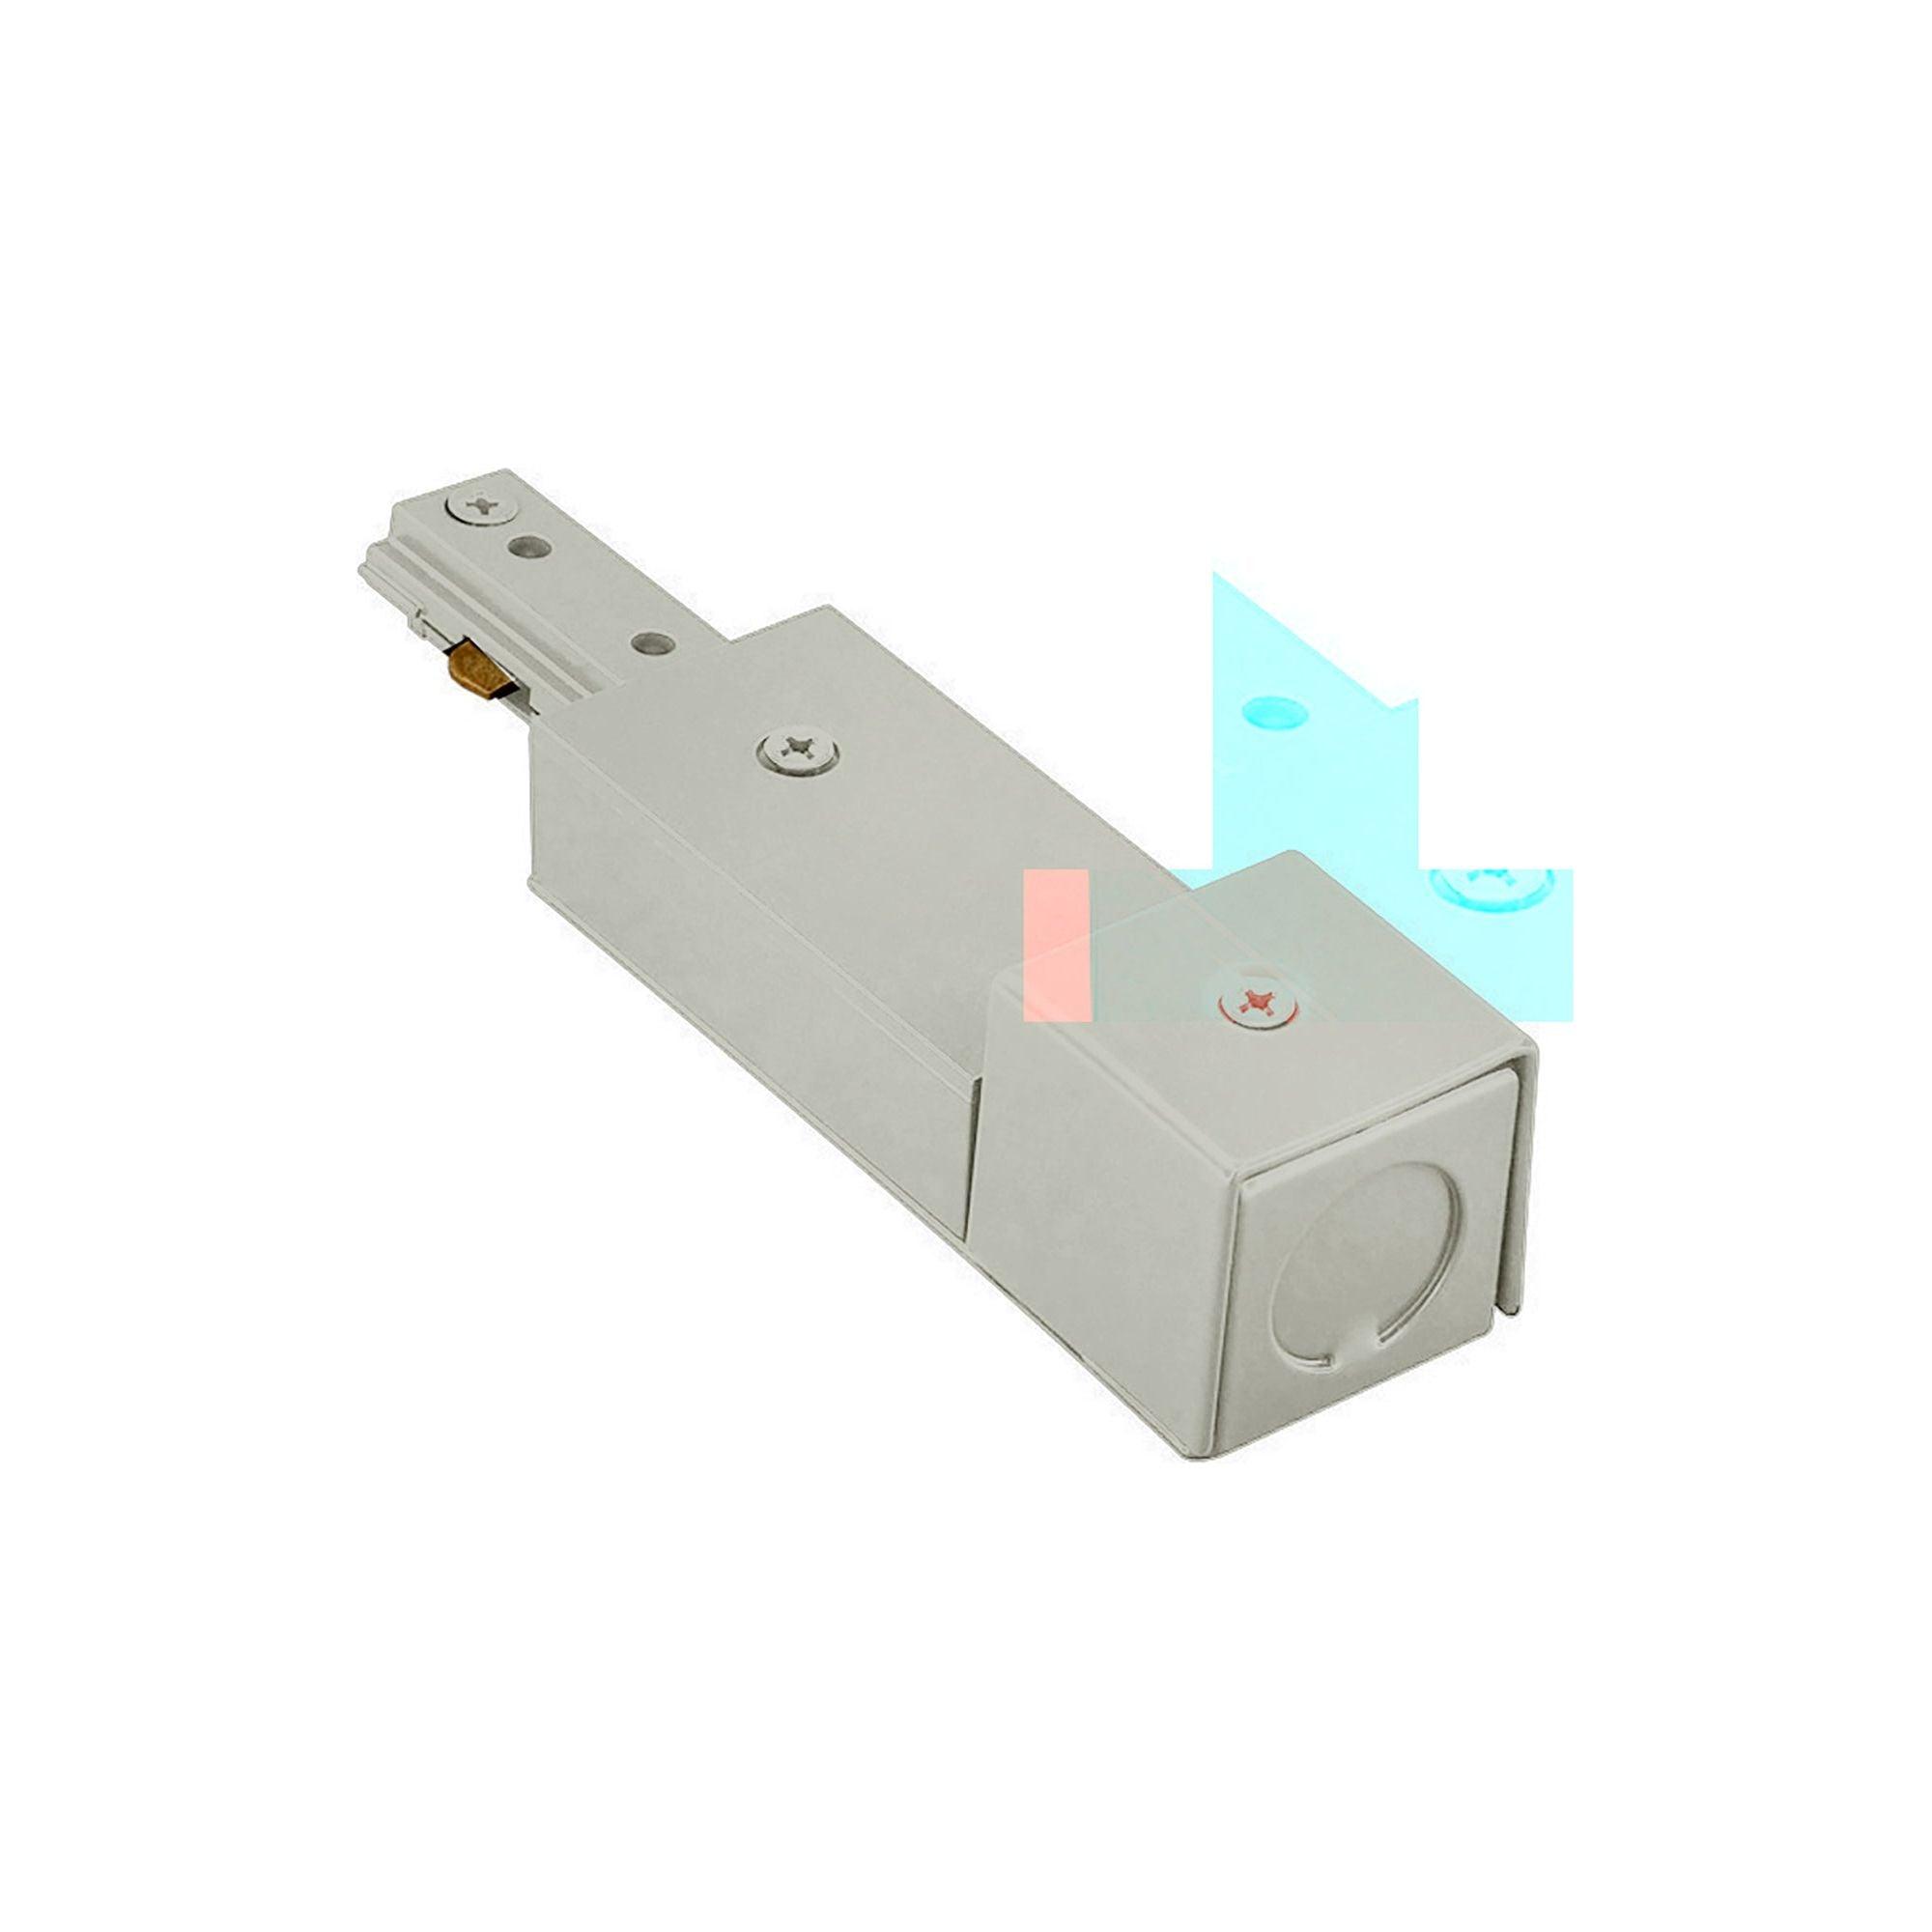 WAC Lighting - H Track Live End BX Connector - Lights Canada